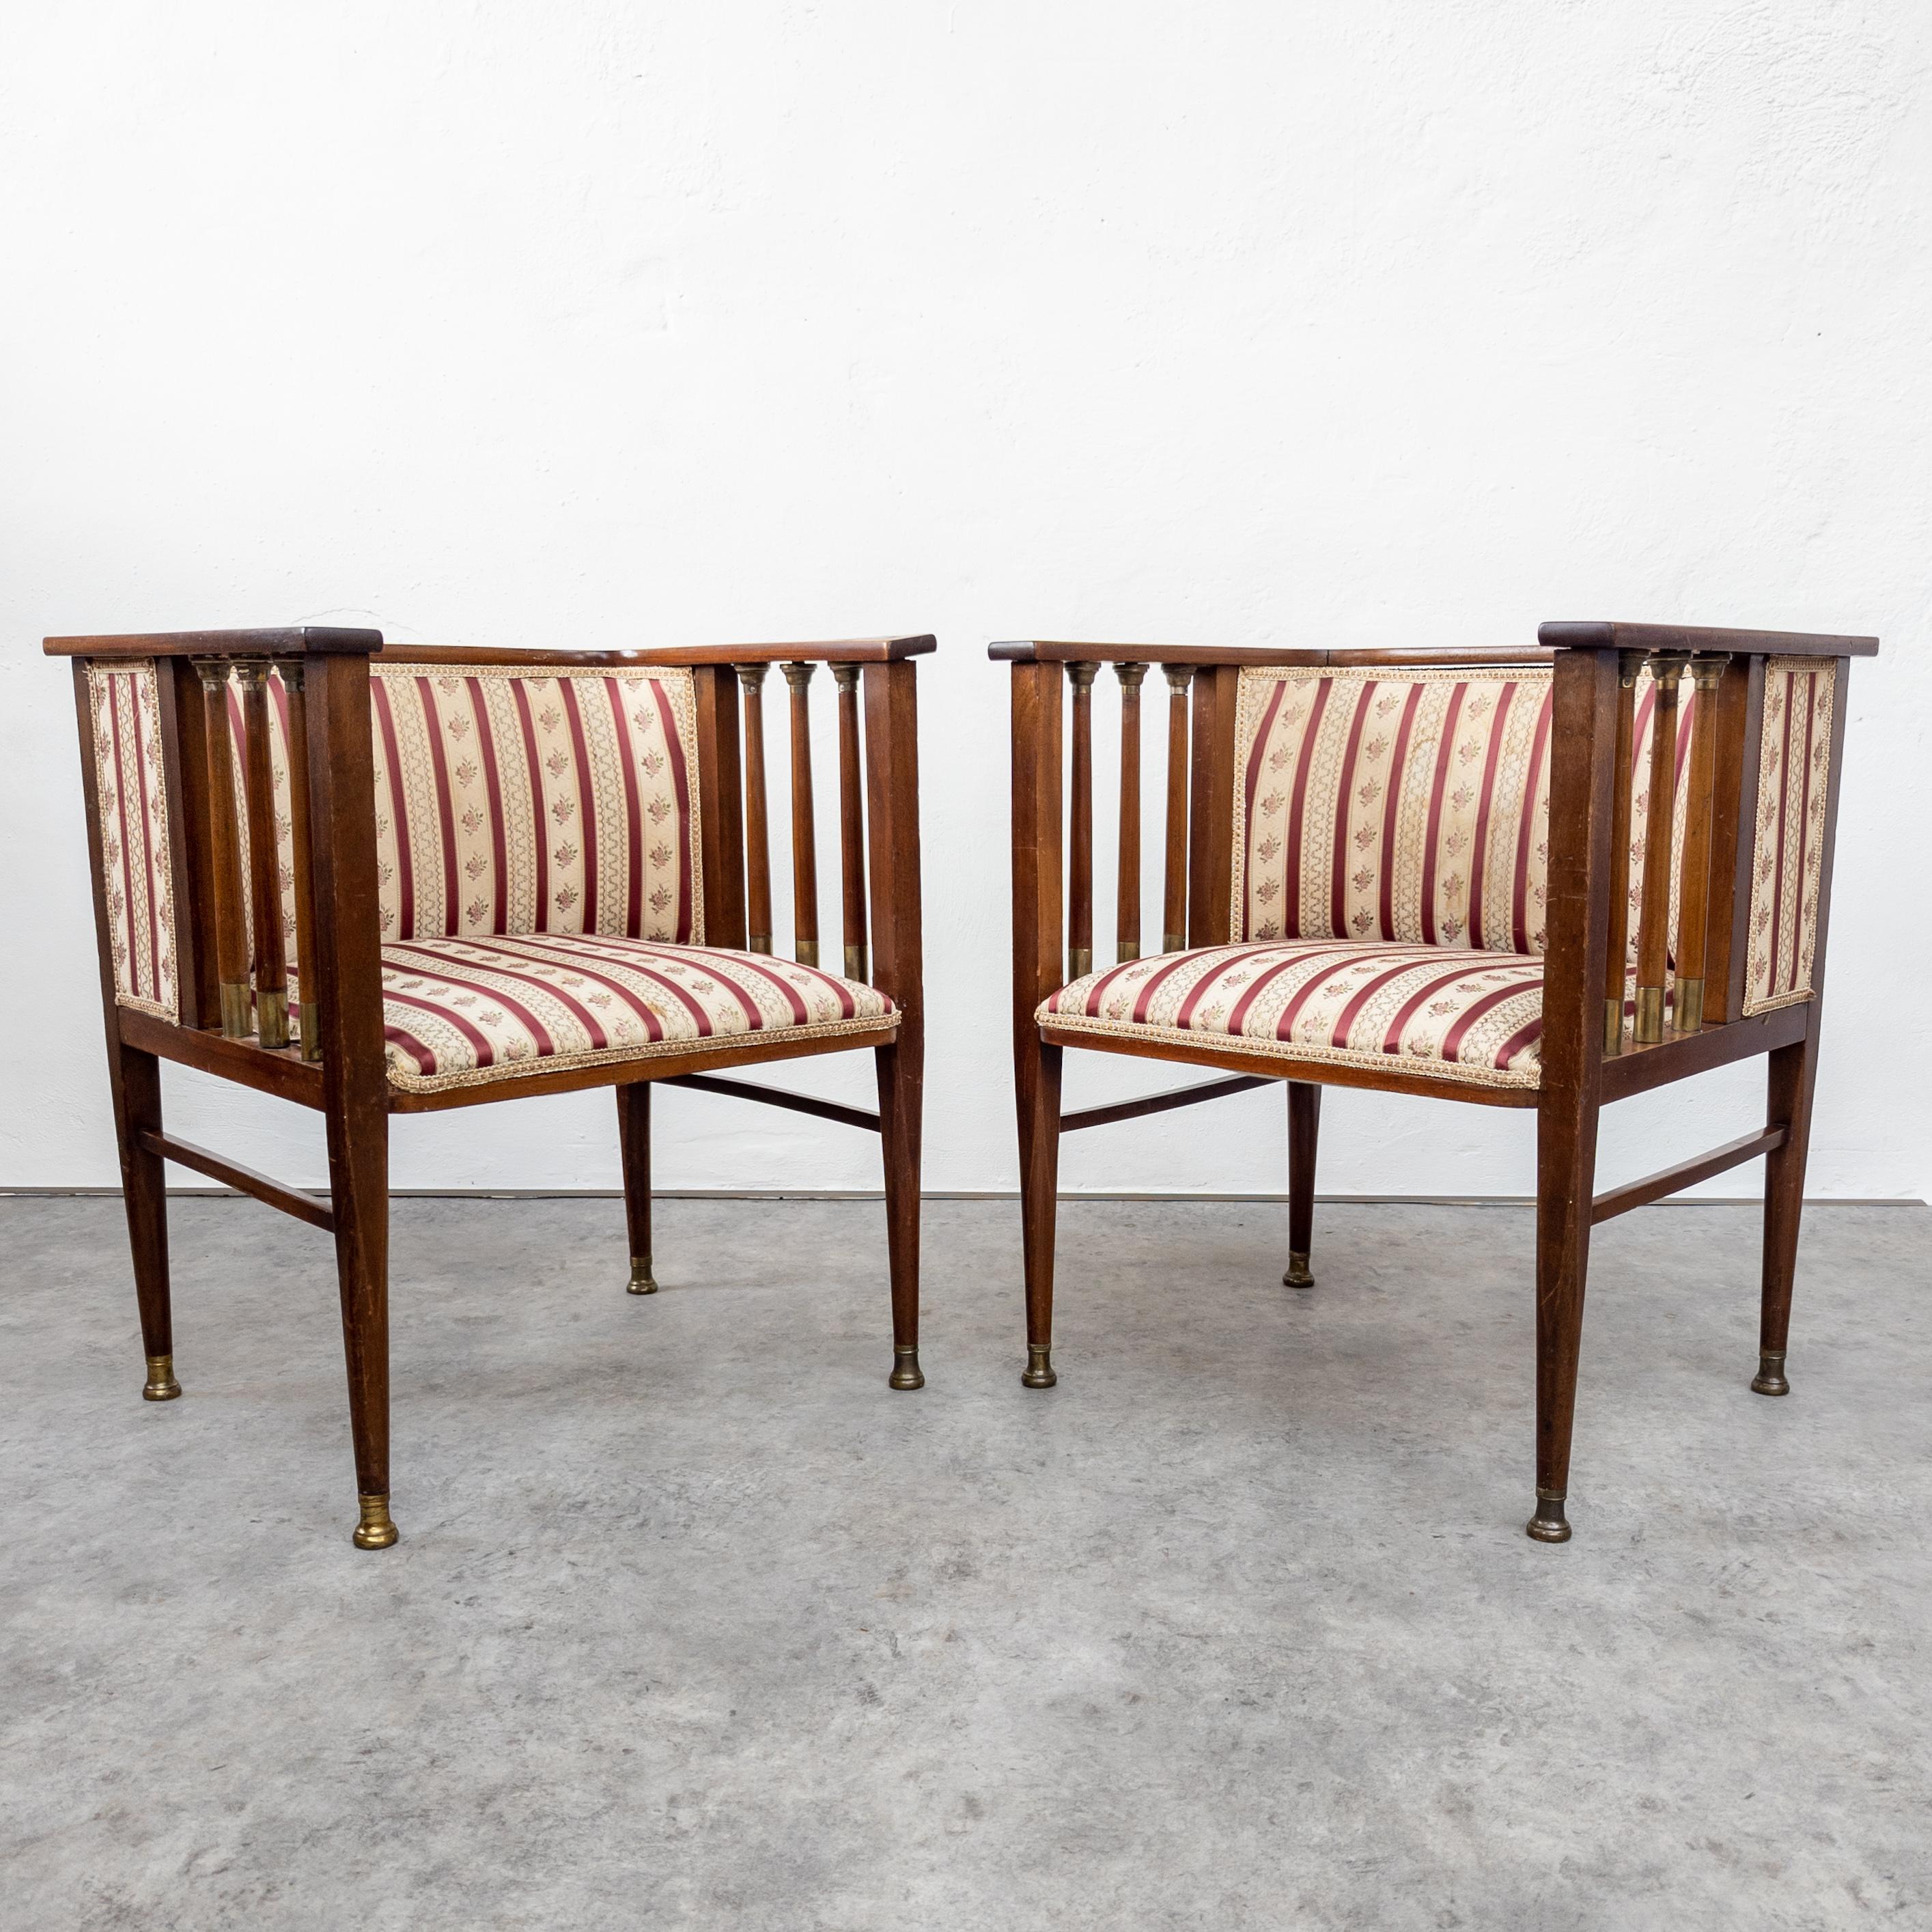 German Art Nouveau Mahogany and Brass Armchairs by Hans Christiansen For Sale